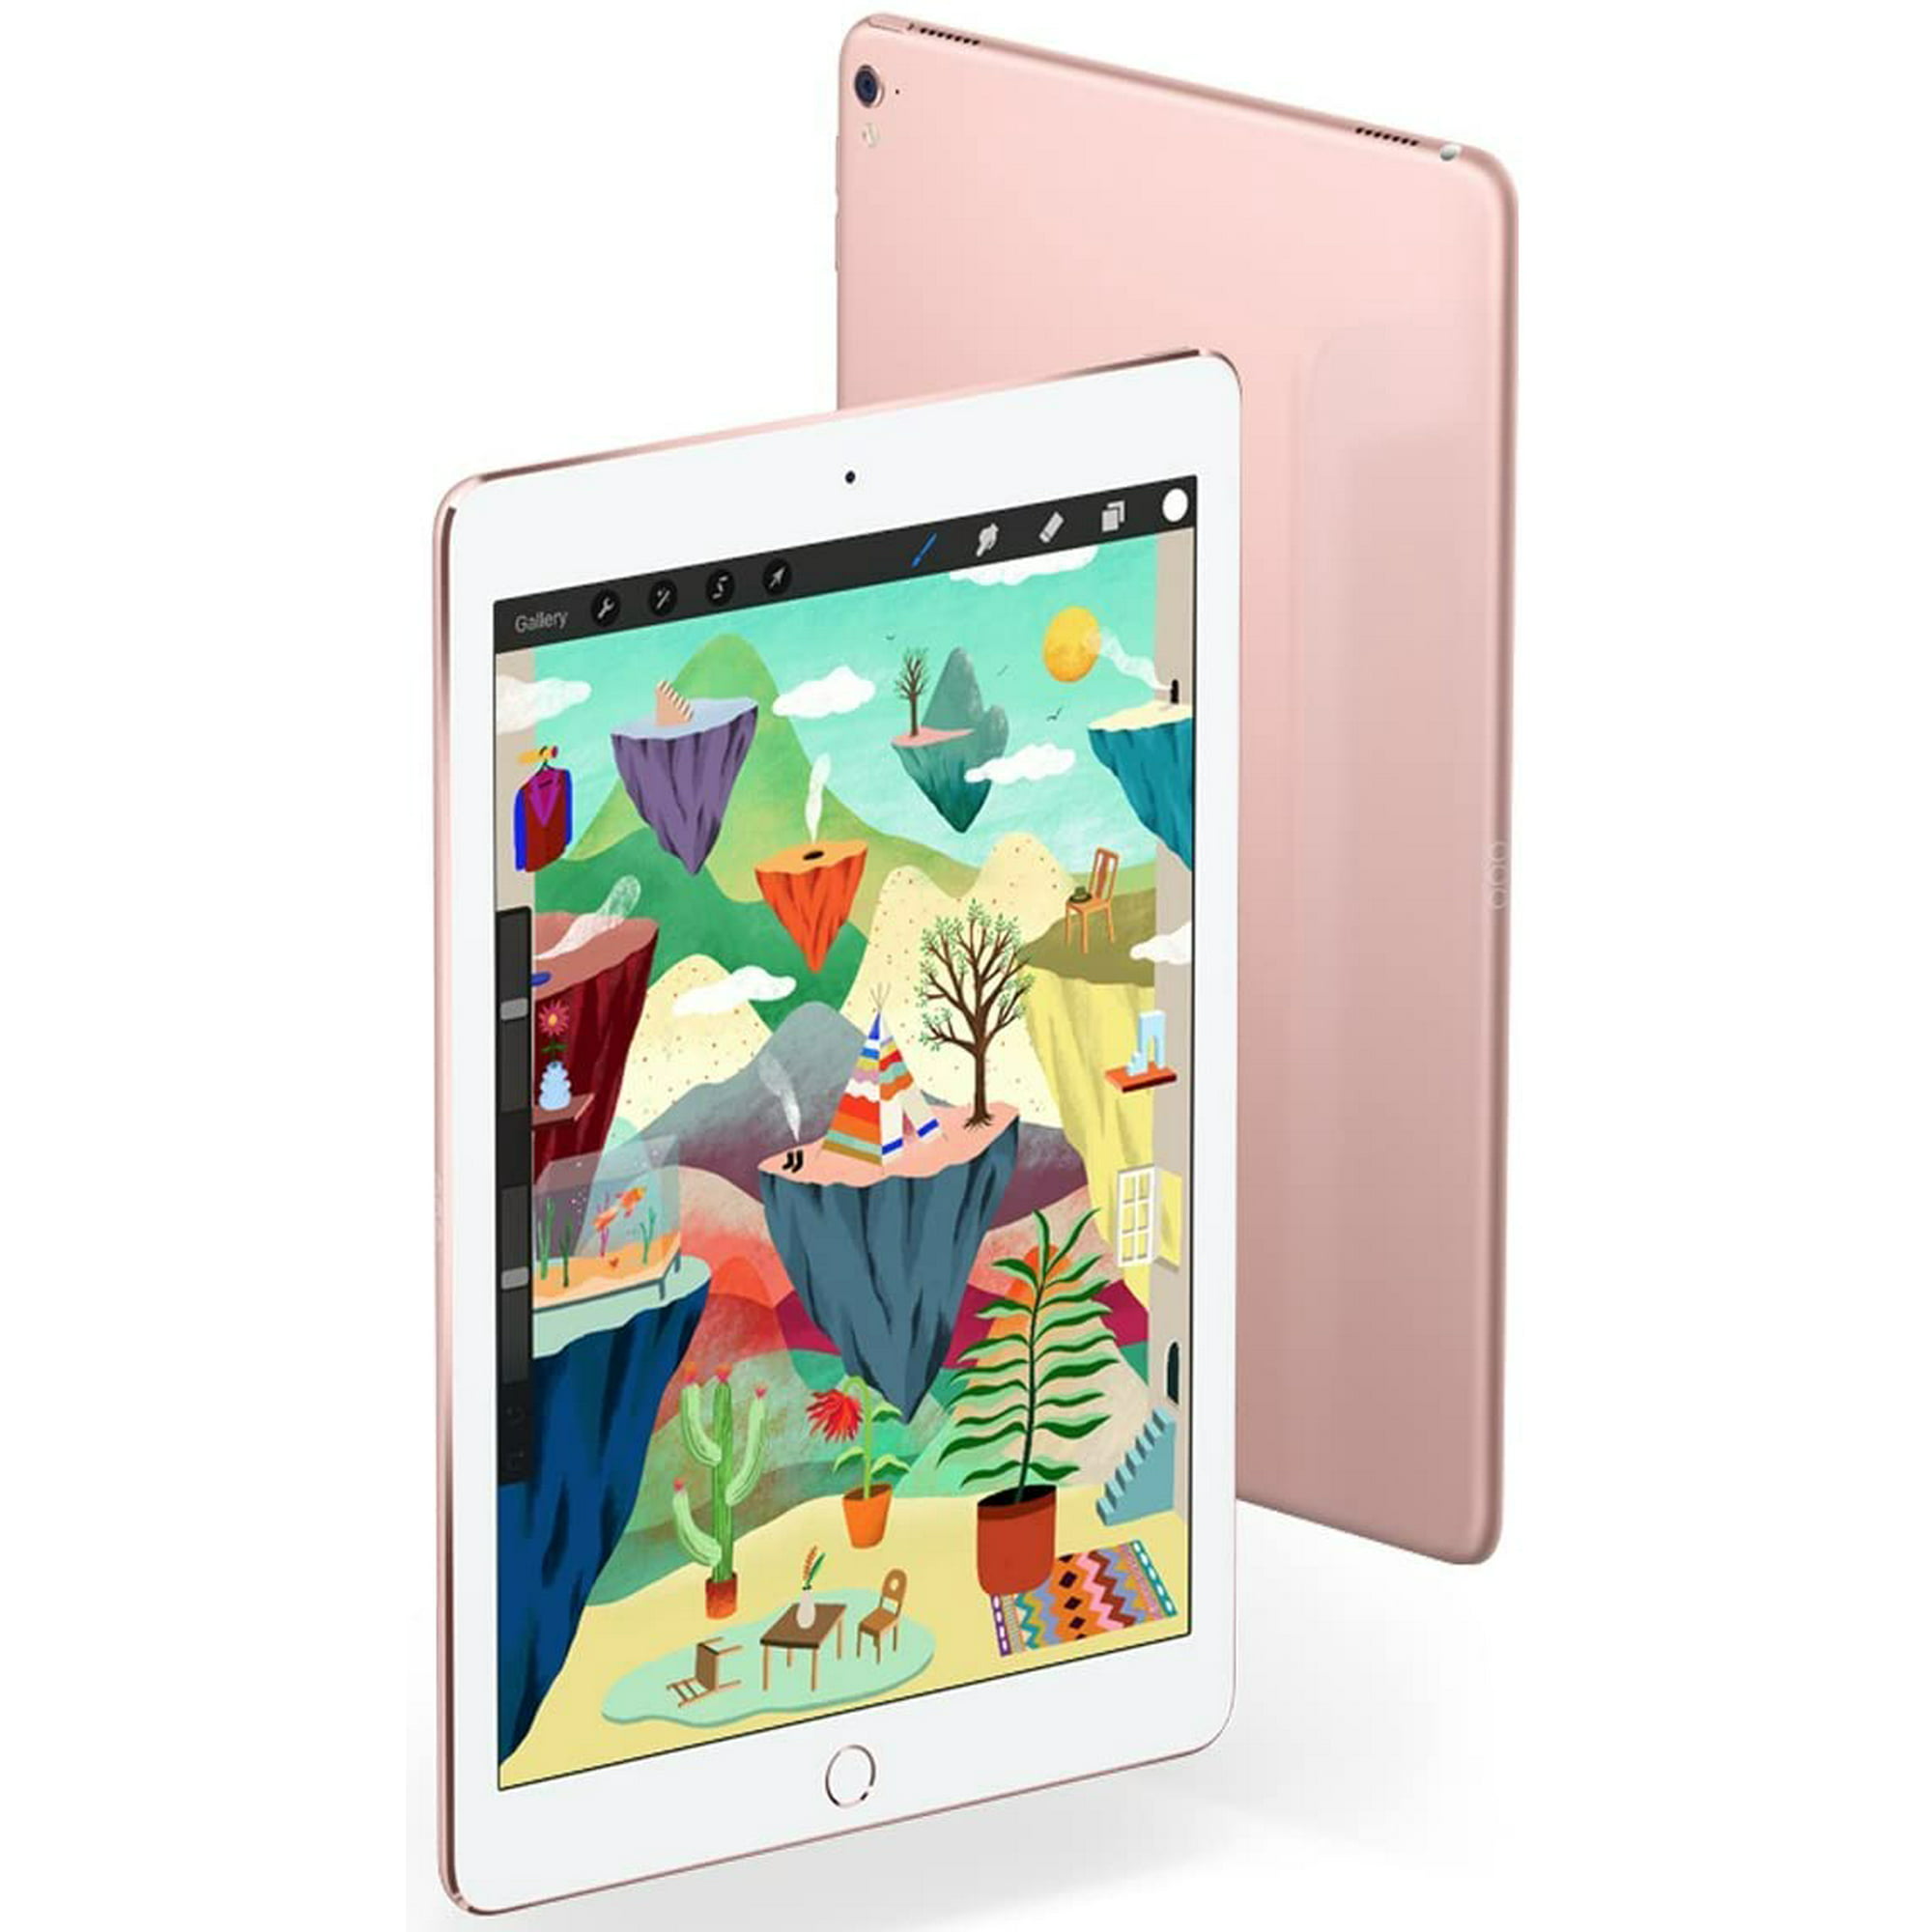 Apple iPad Pro Tablet (256GB, Wi-Fi Only, 9.7') Rose Gold (Scratch and Dent)